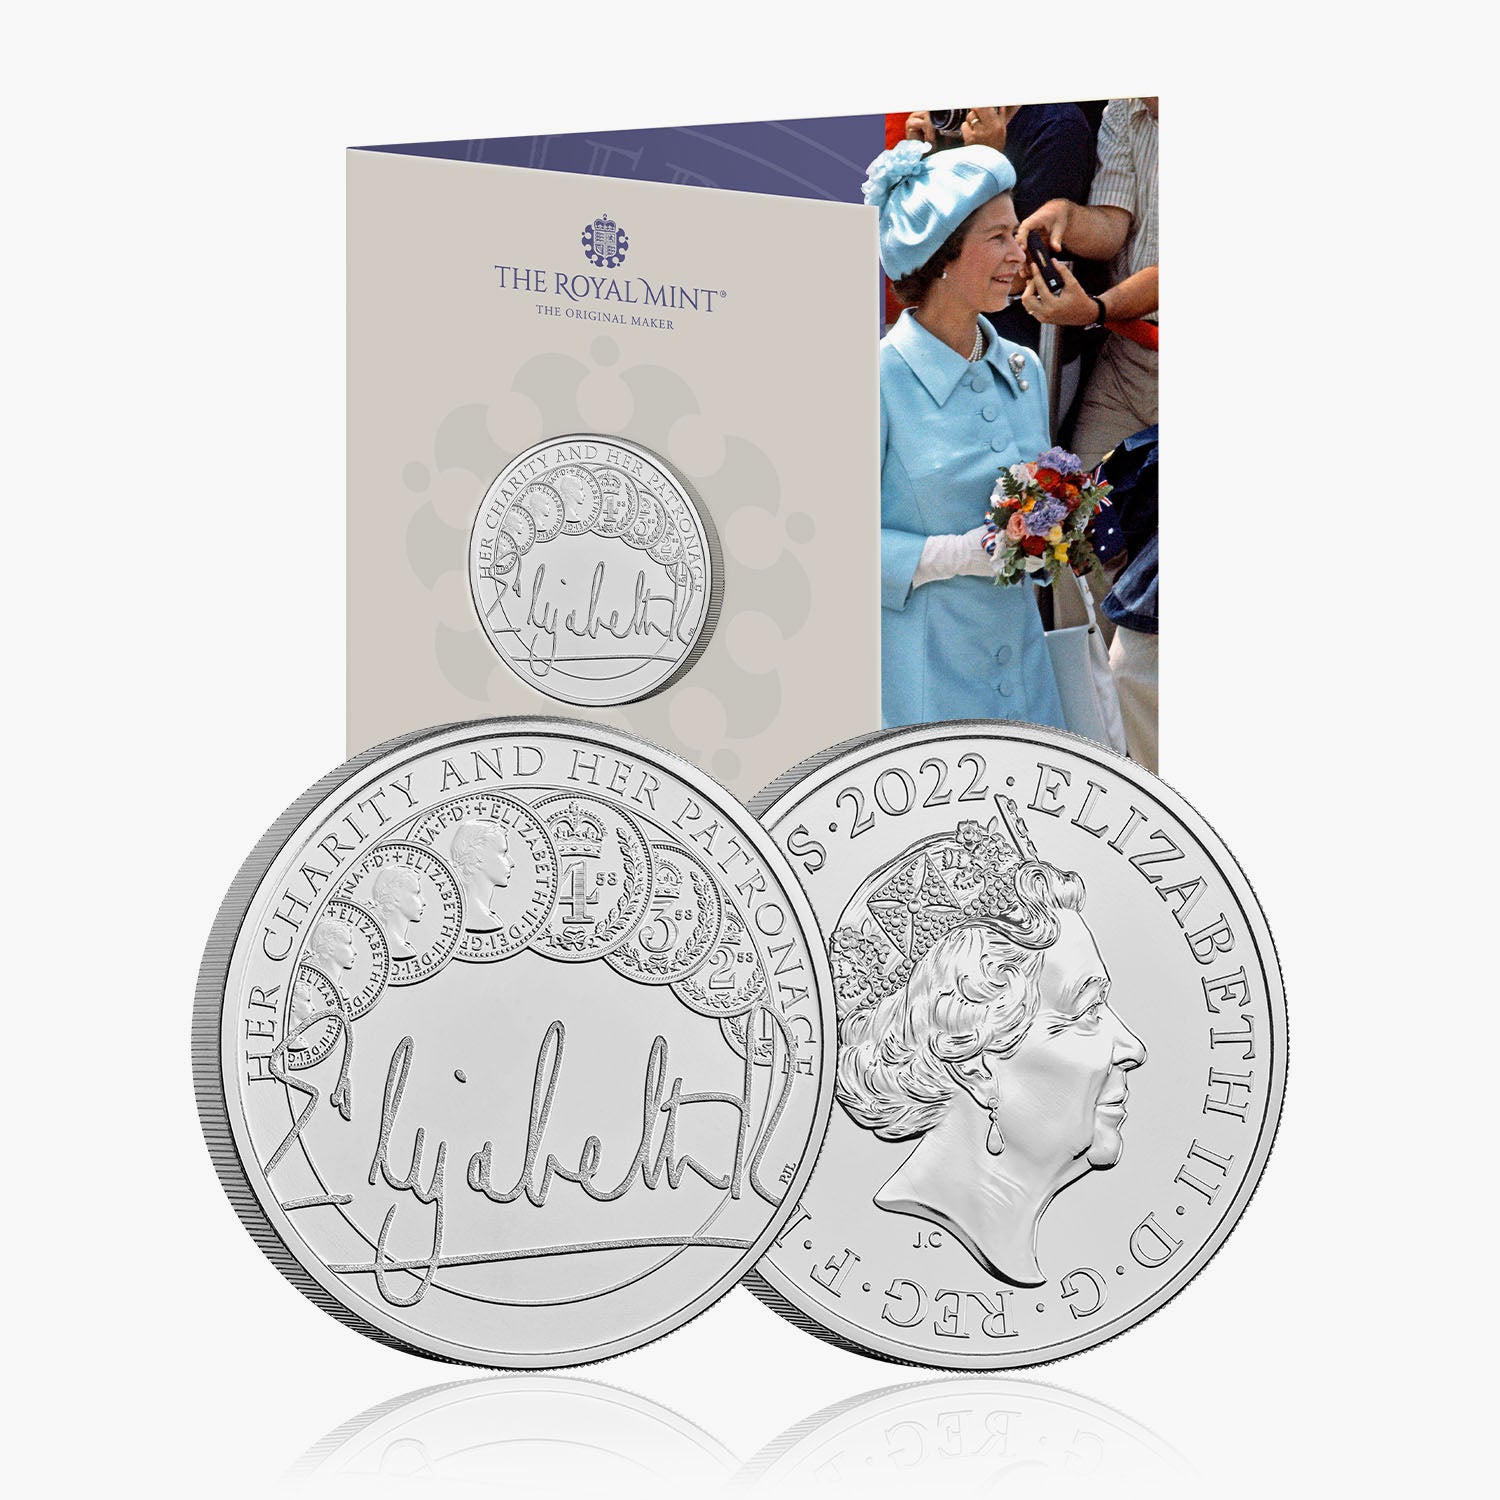 The Queen's Reign Charity &amp; Patronage 2022 UK £ 5 BU Coin